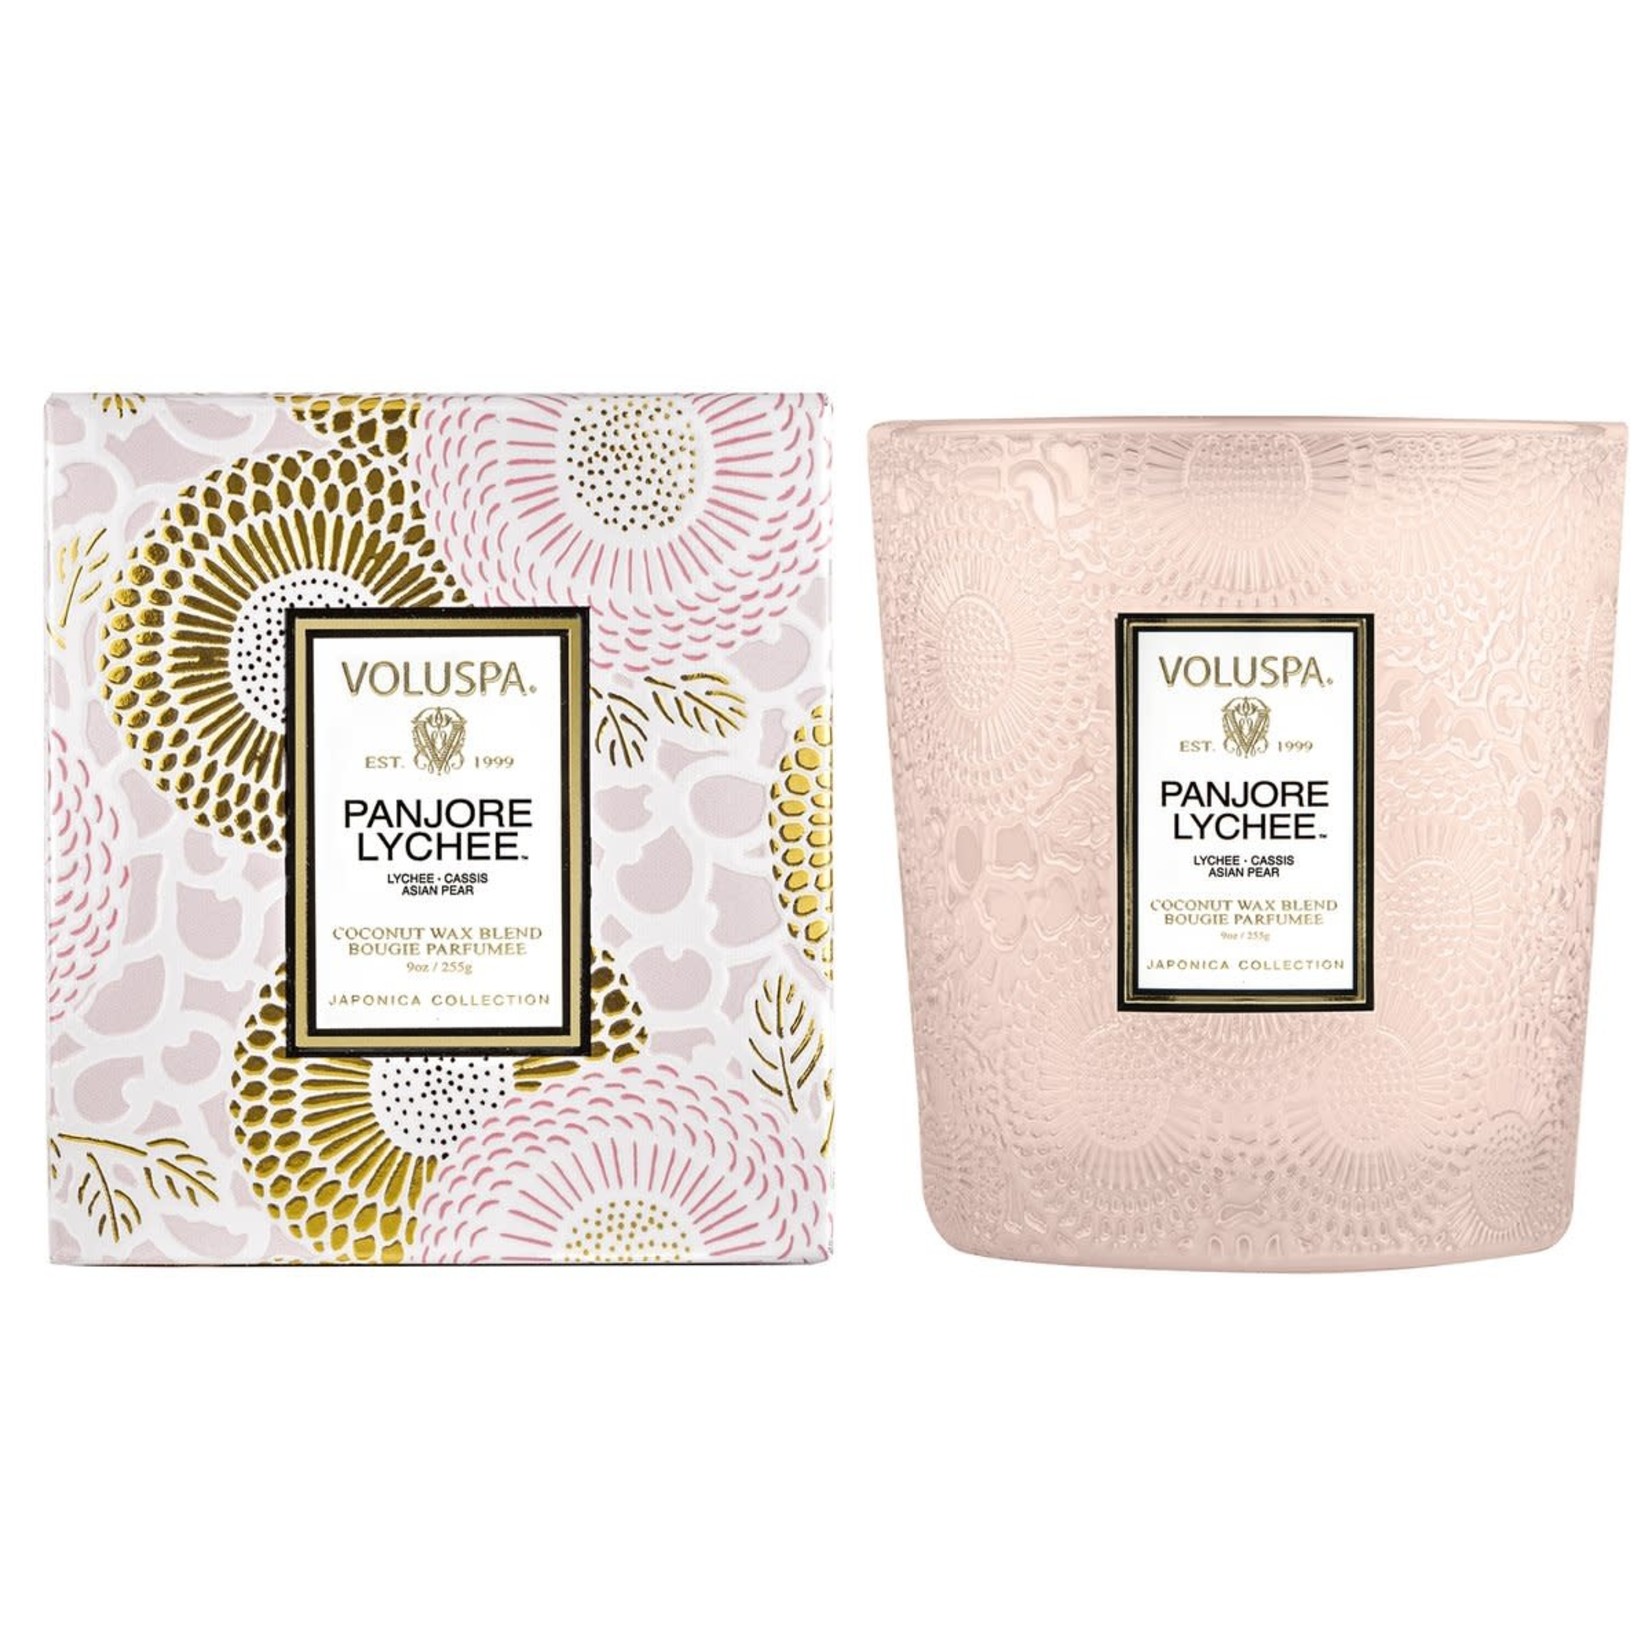 Voluspa Panjore Lychee 9oz Classic Candle